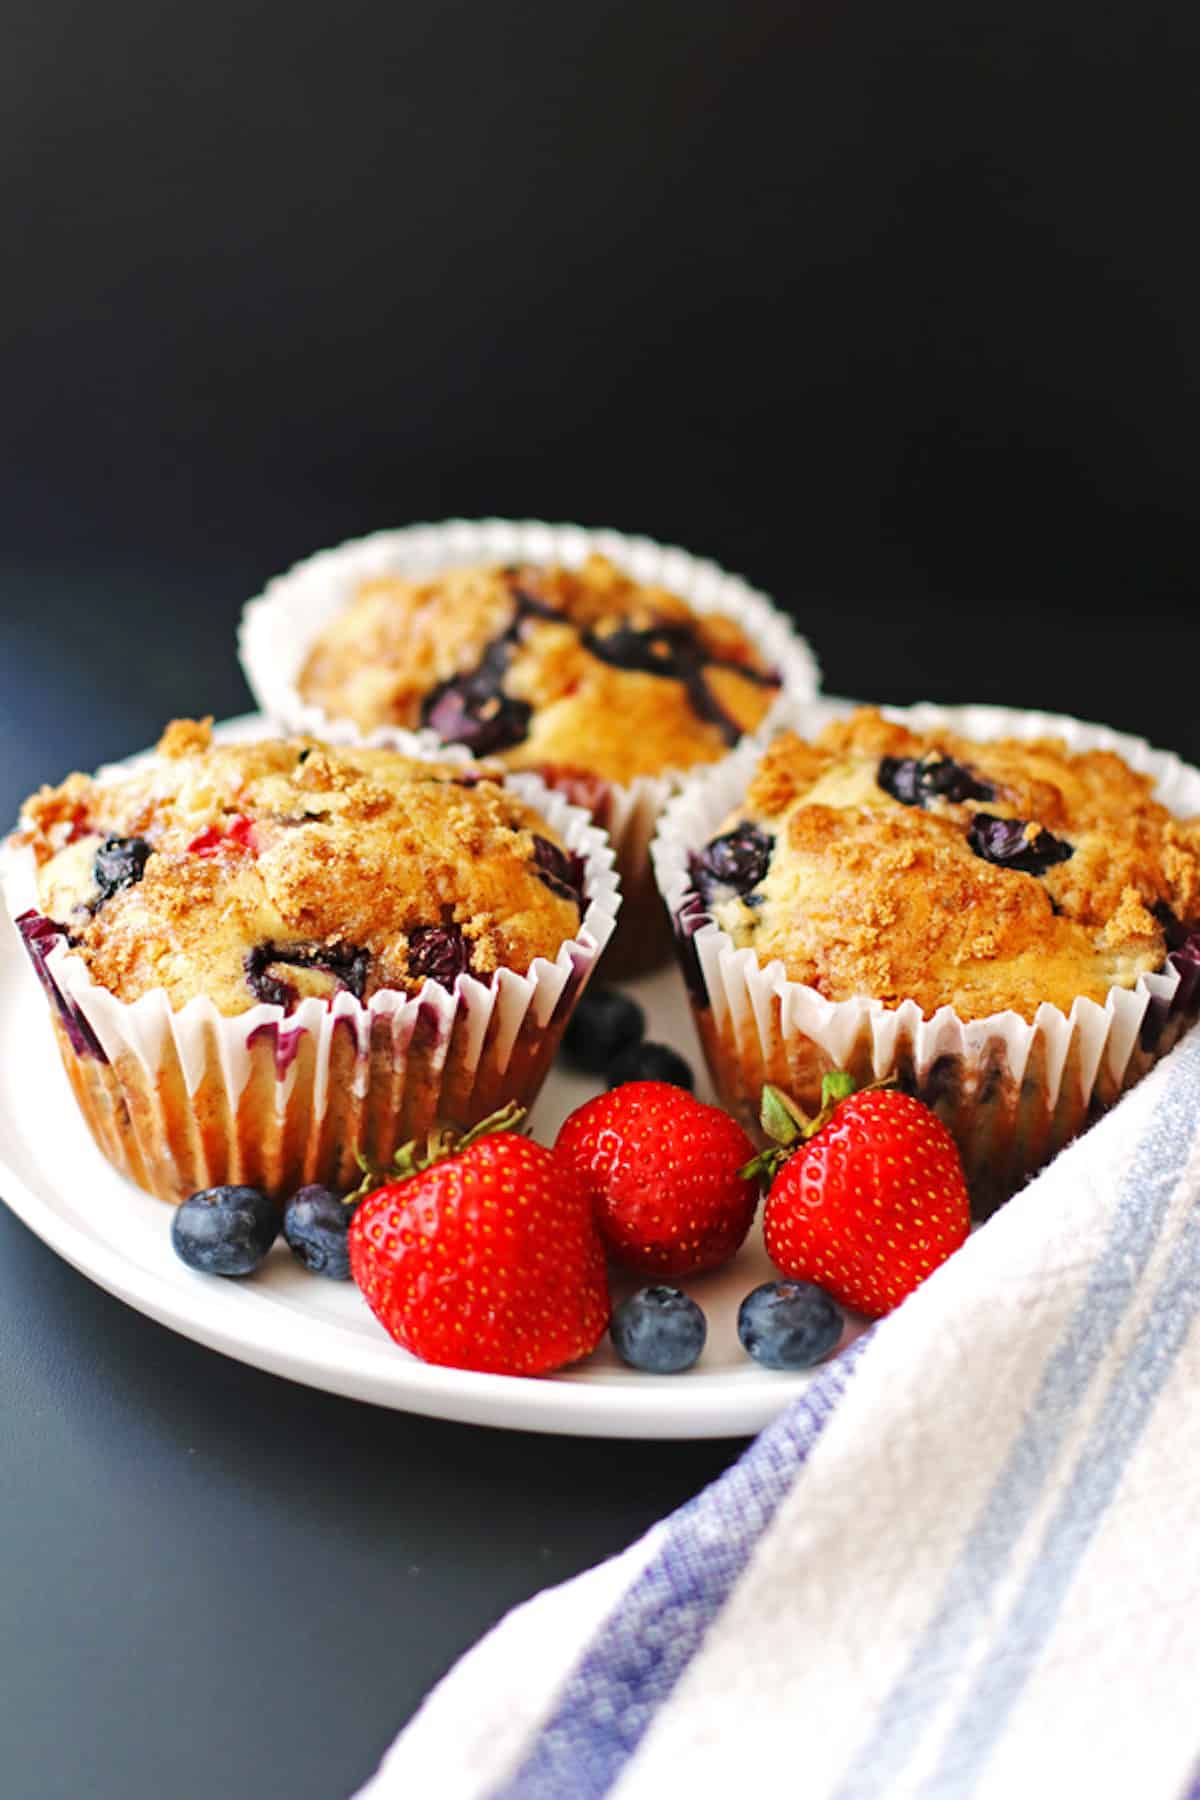 Three mixed berry muffins in paper liners on a plate.